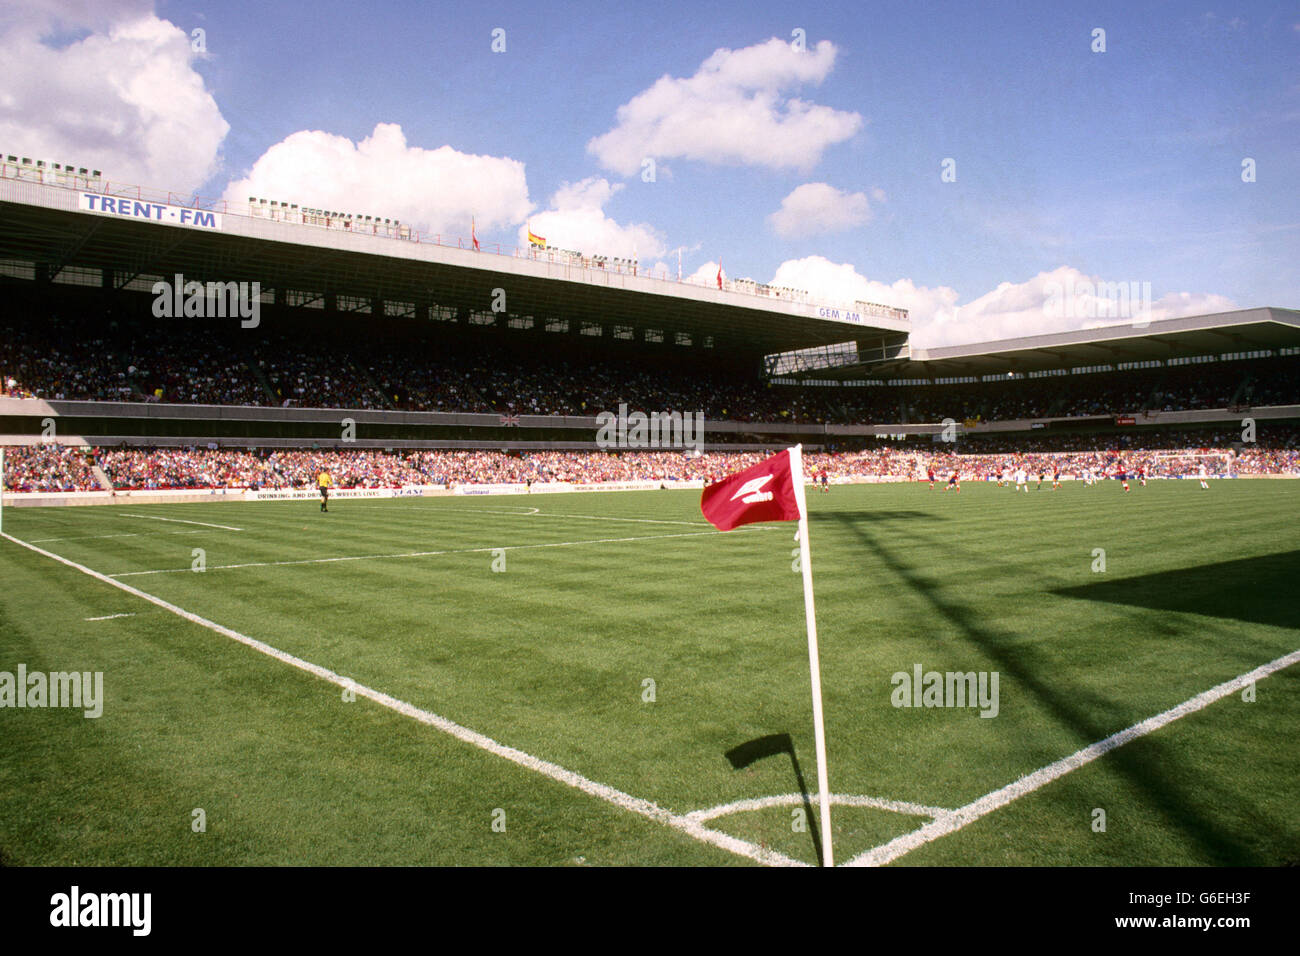 Soccer - European U18 Championships - Final - England v Turkey - City Ground. General view of the crowds at the City Ground, home to Nottingham Forest Football Club. Stock Photo